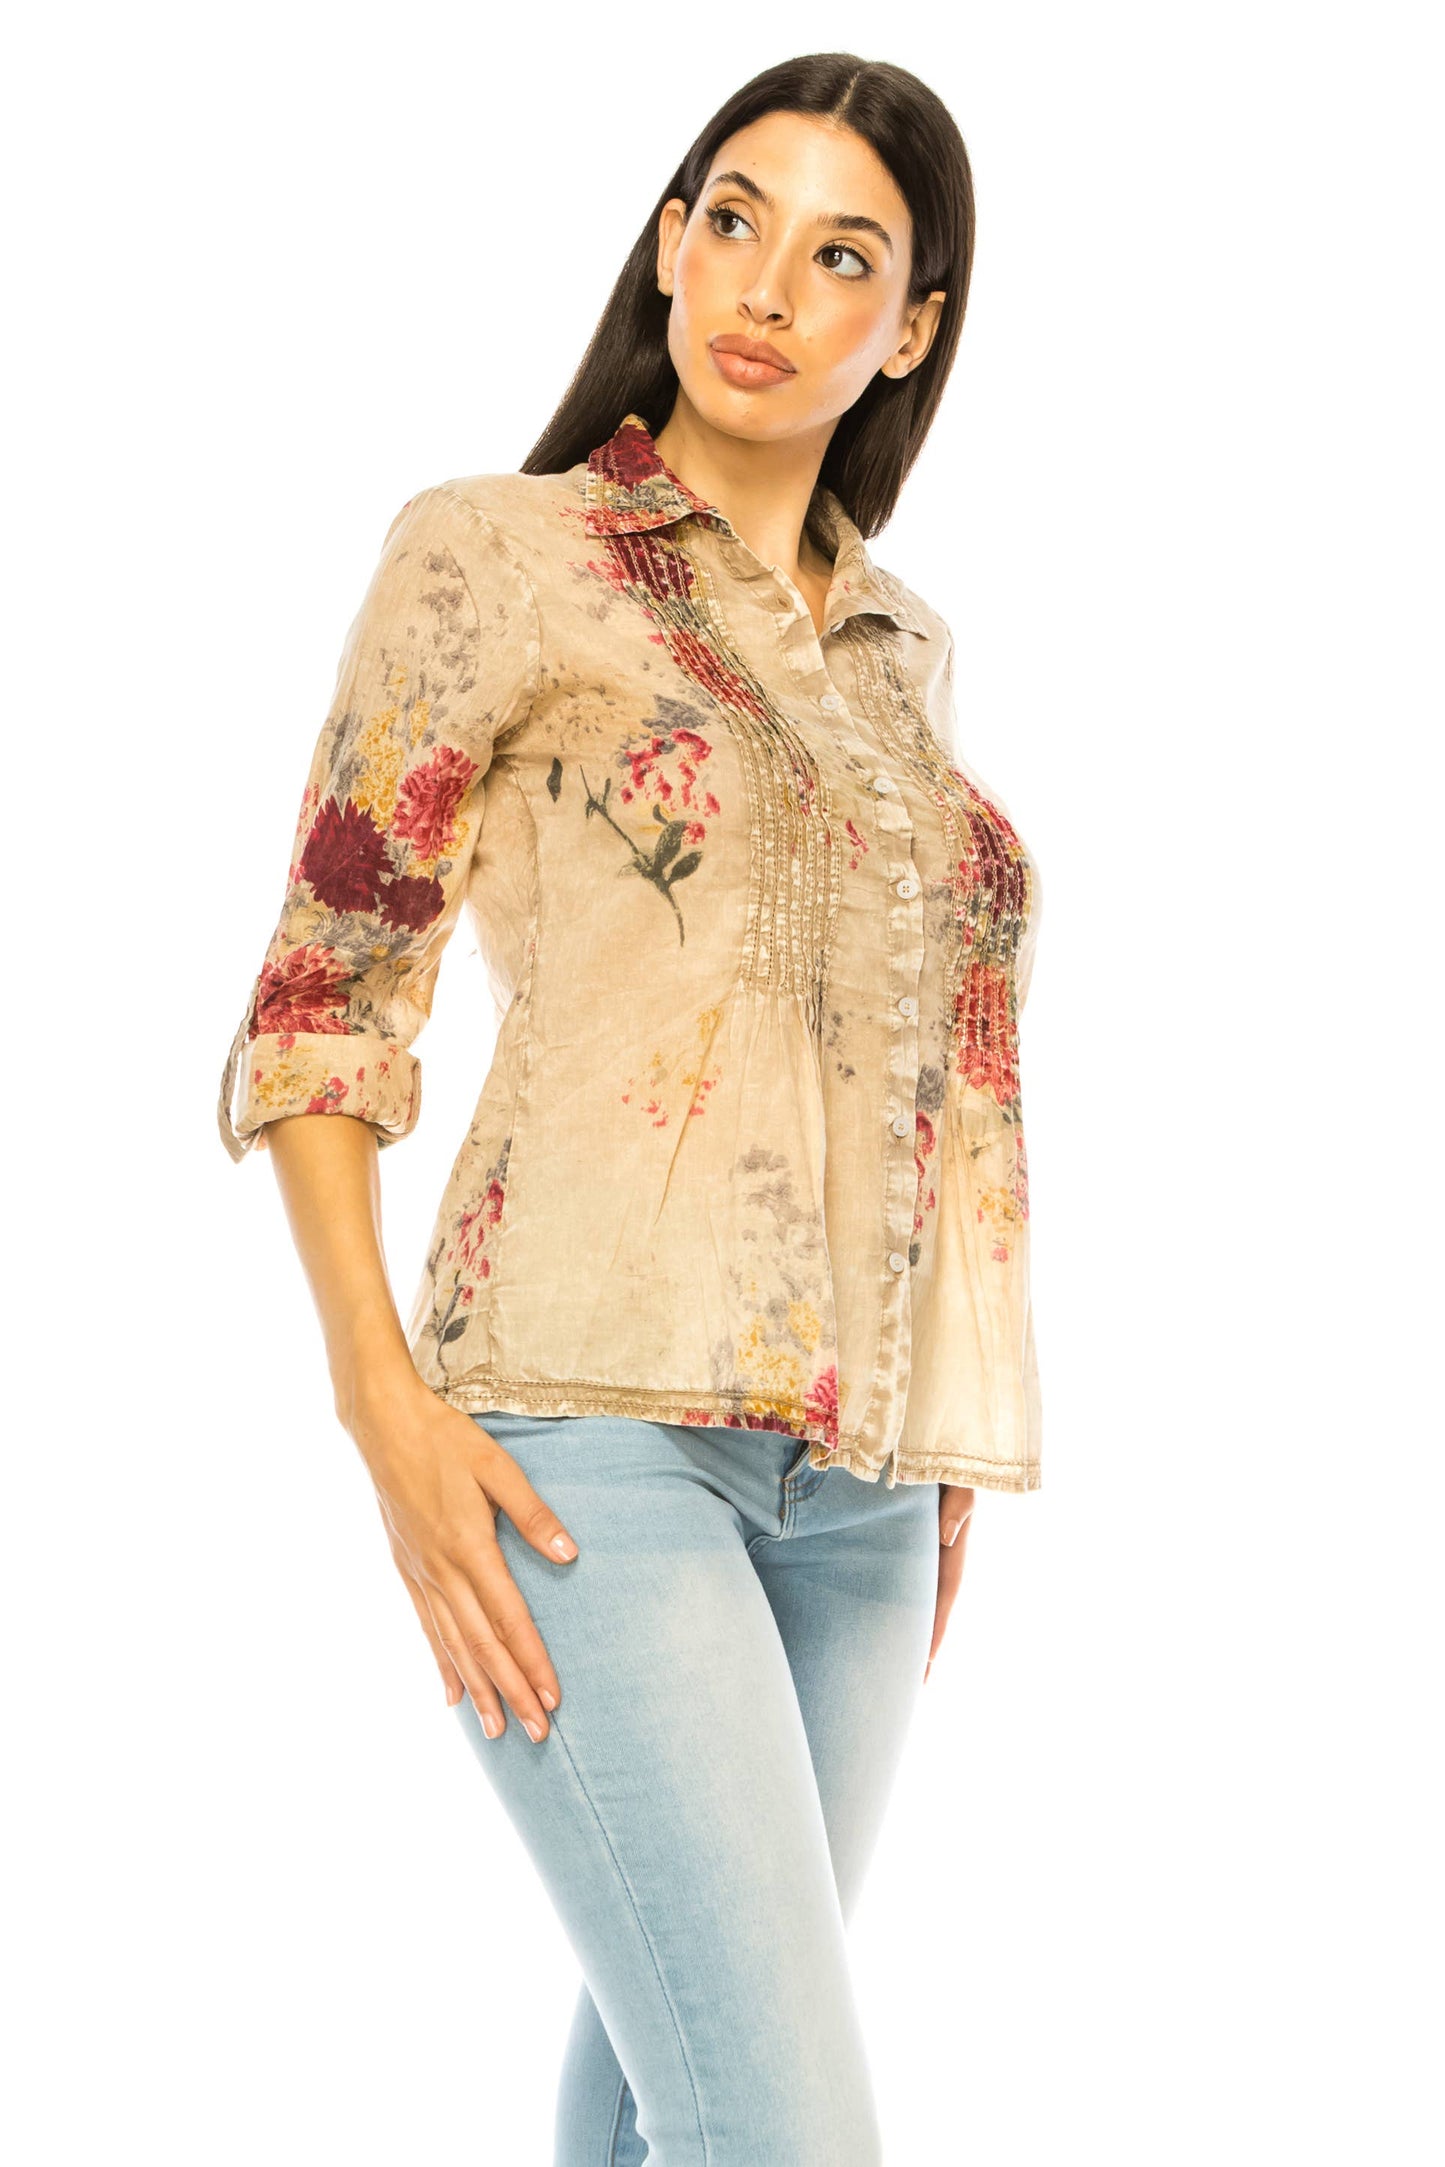 Vintage Floral Taupe Shirt with Lace Inserts and Pin Tucks